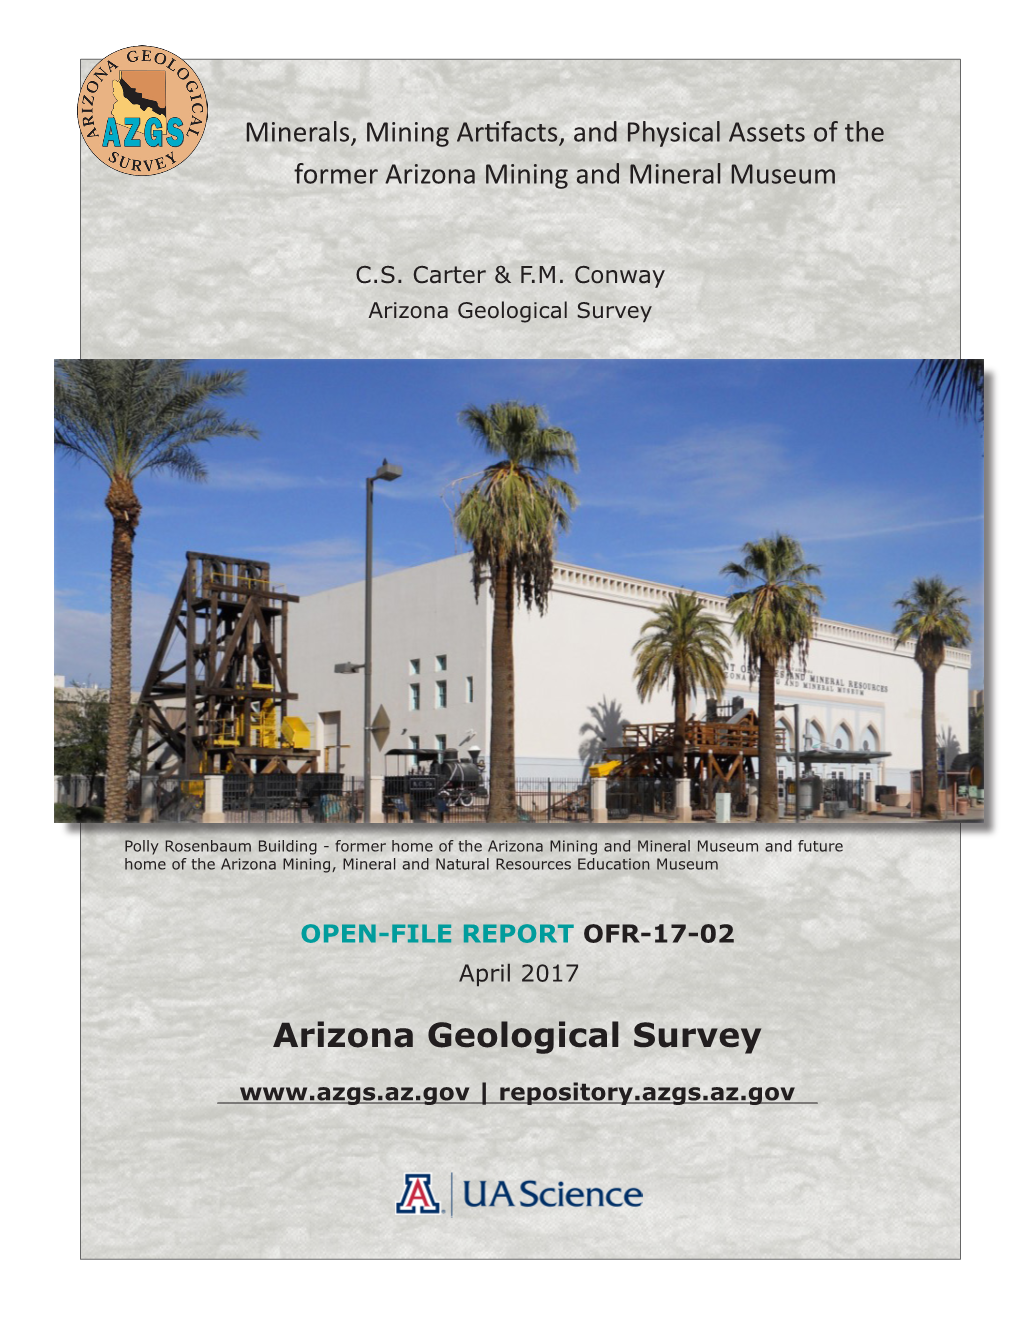 Minerals, Mining Artifacts, and Physical Assets of the Former Arizona Mining and Mineral Museum